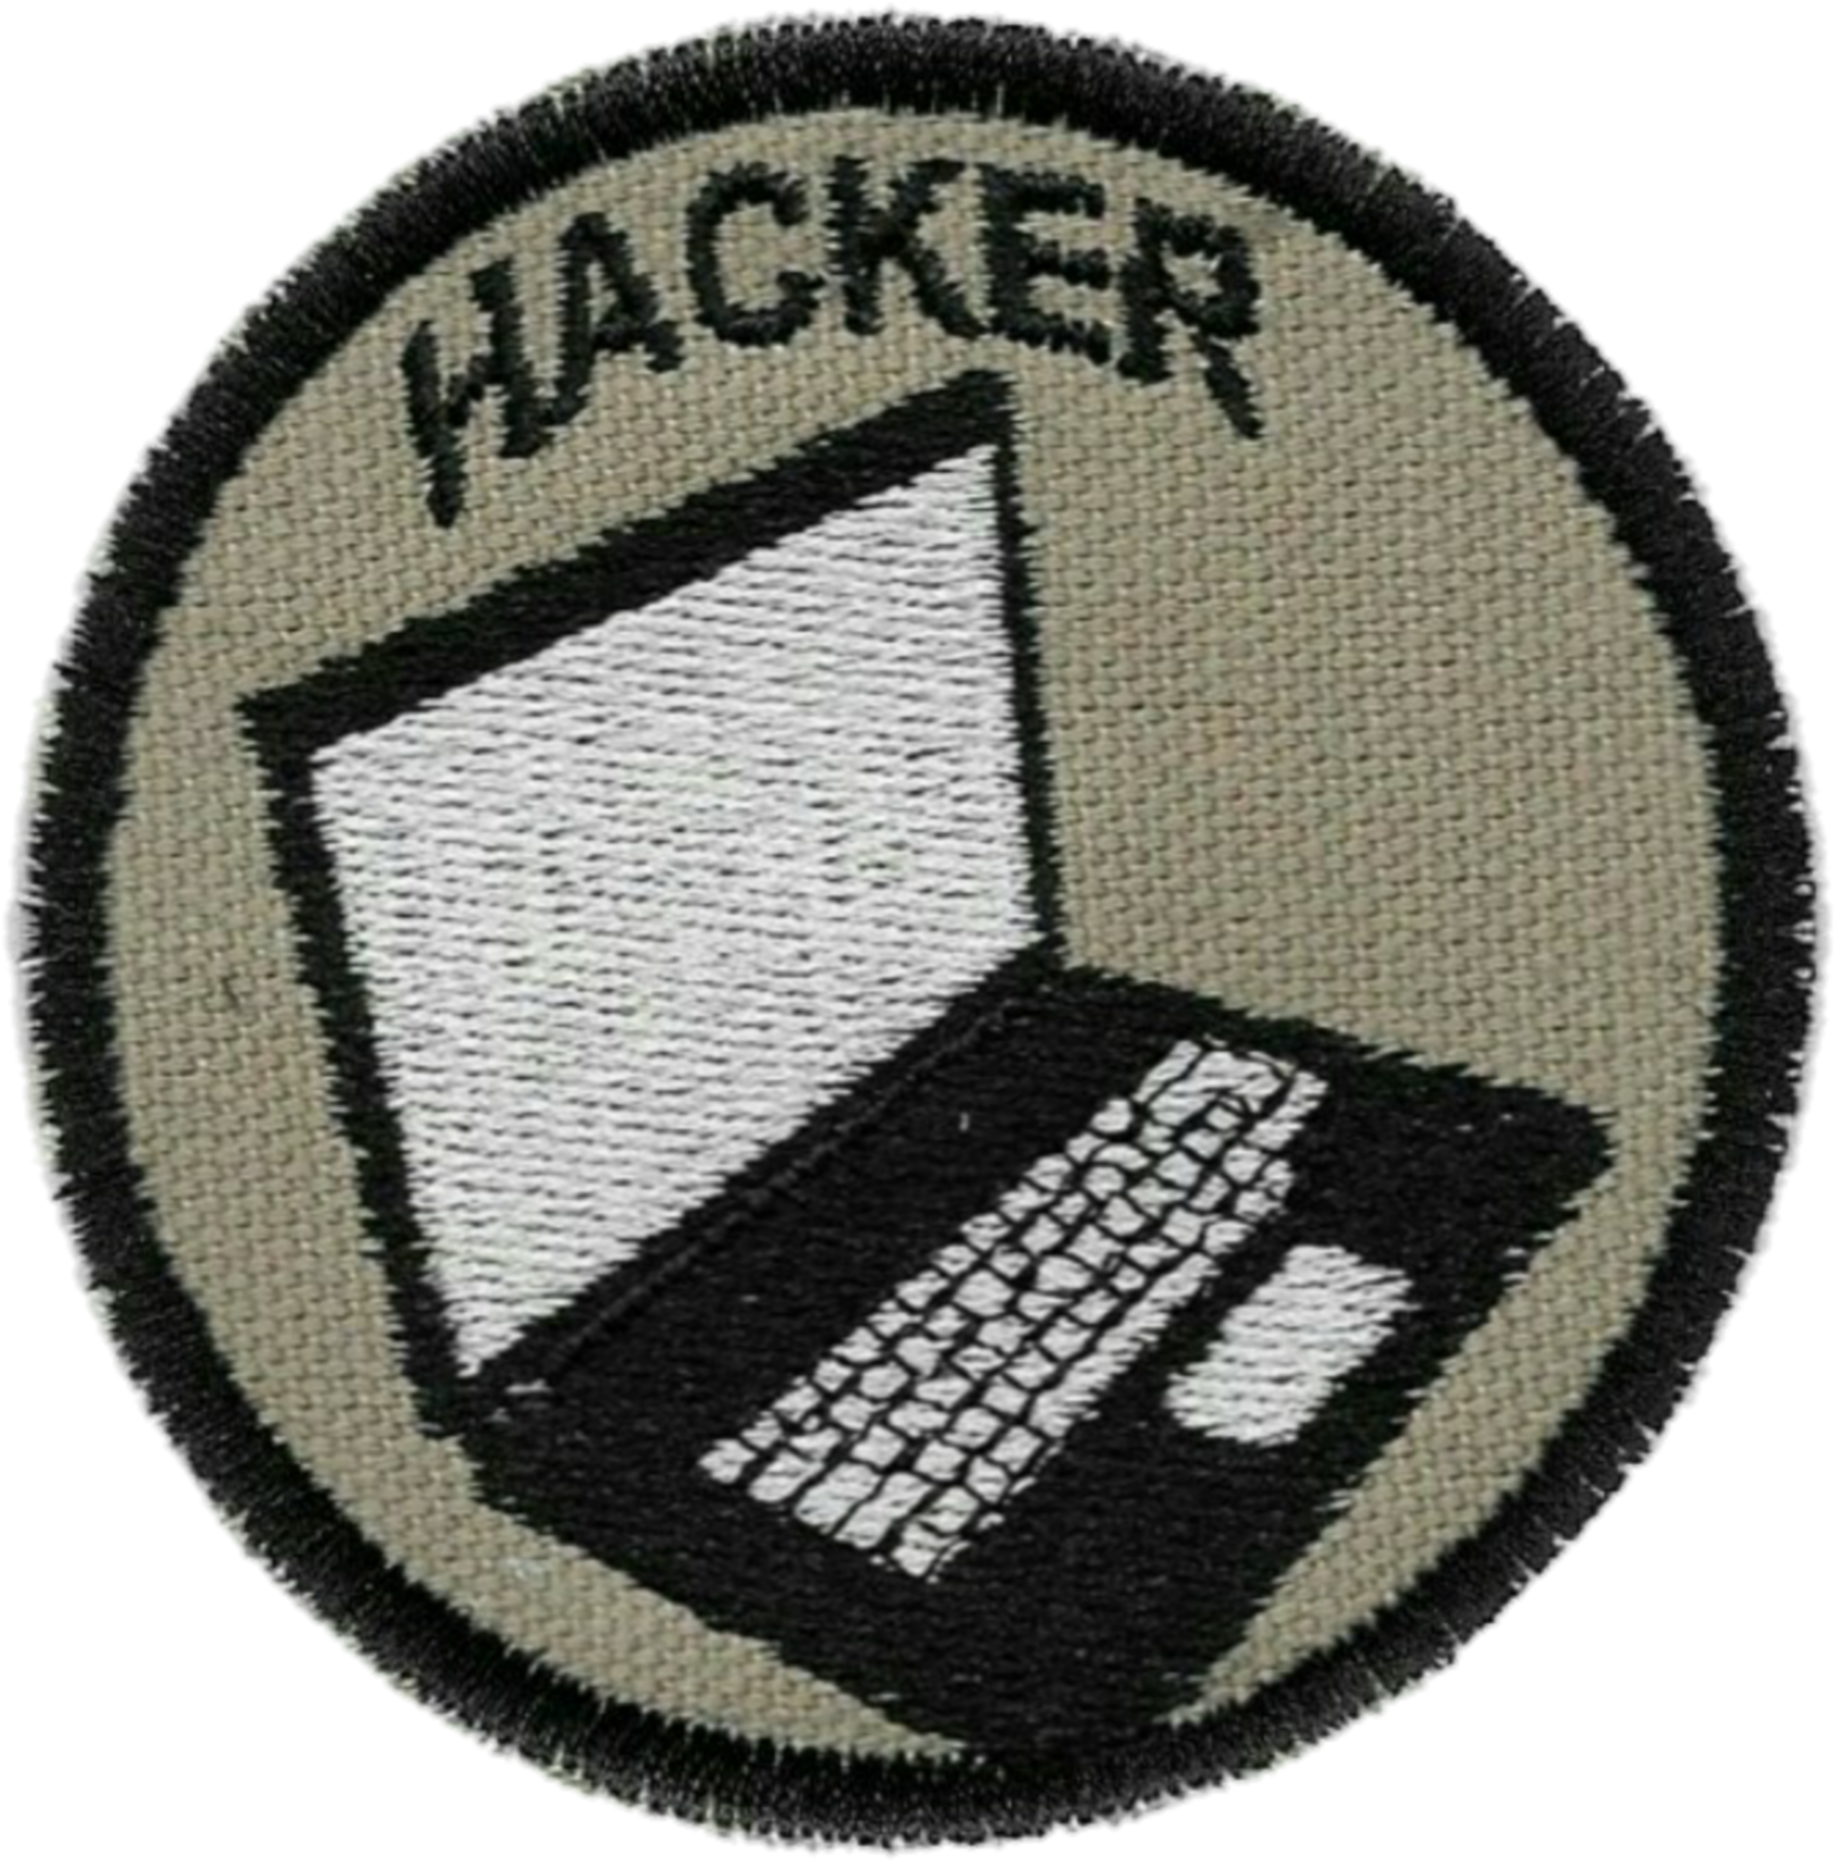 A Patch With A Laptop On It